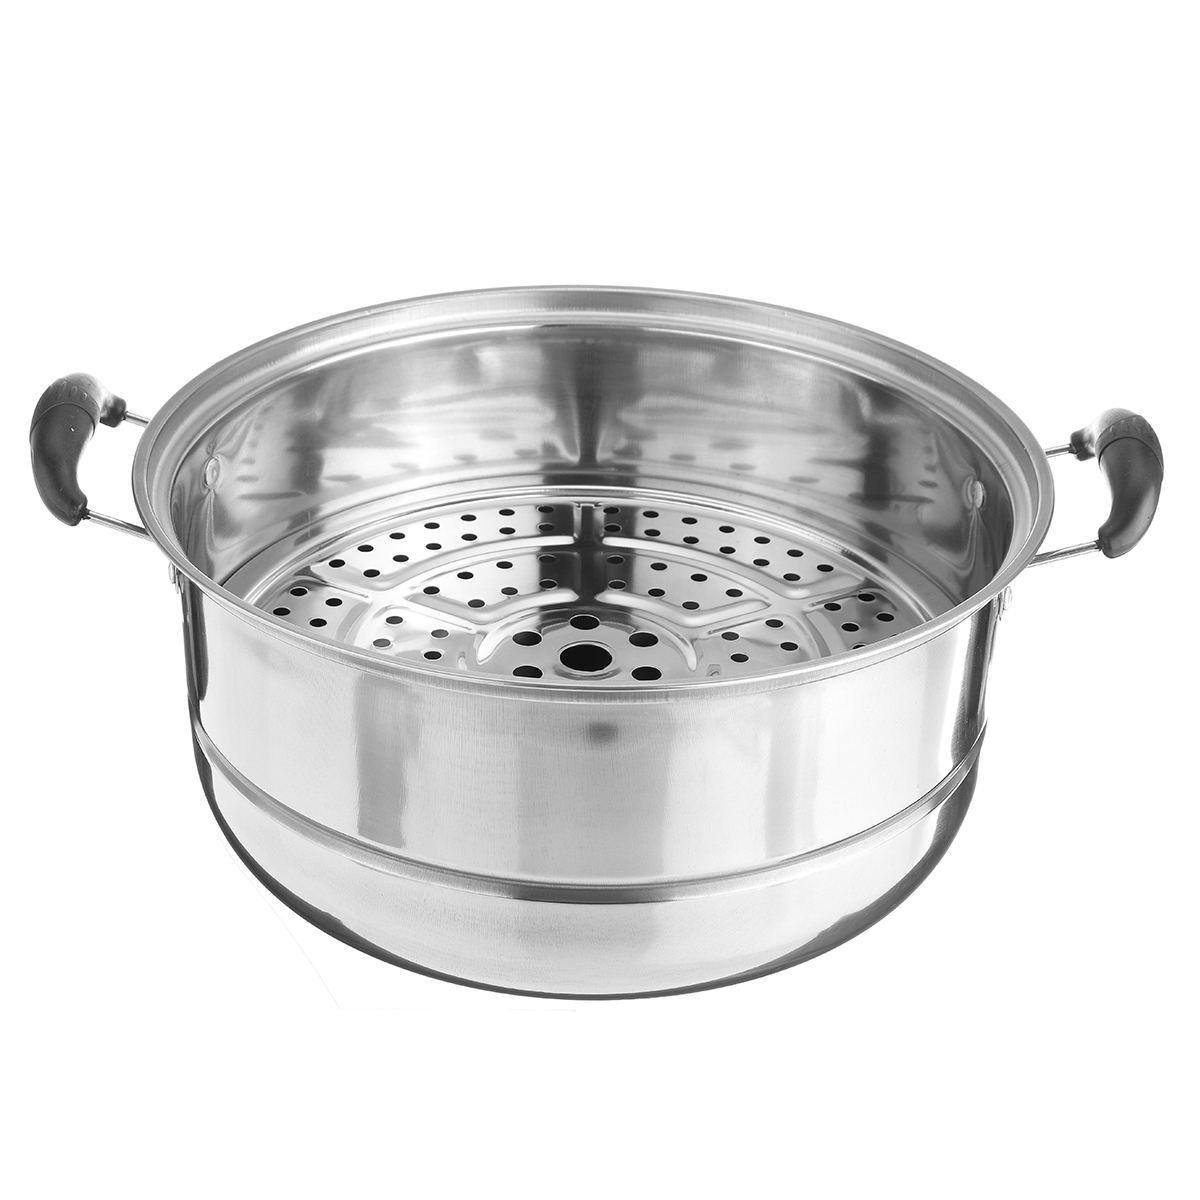 3-Tier-Stainless-Steel-Pot-Steamer-Steam-Cooking-Cooker-Cookware-Hot-Pot-Kitchen-Cooking-Tools-1672892-8